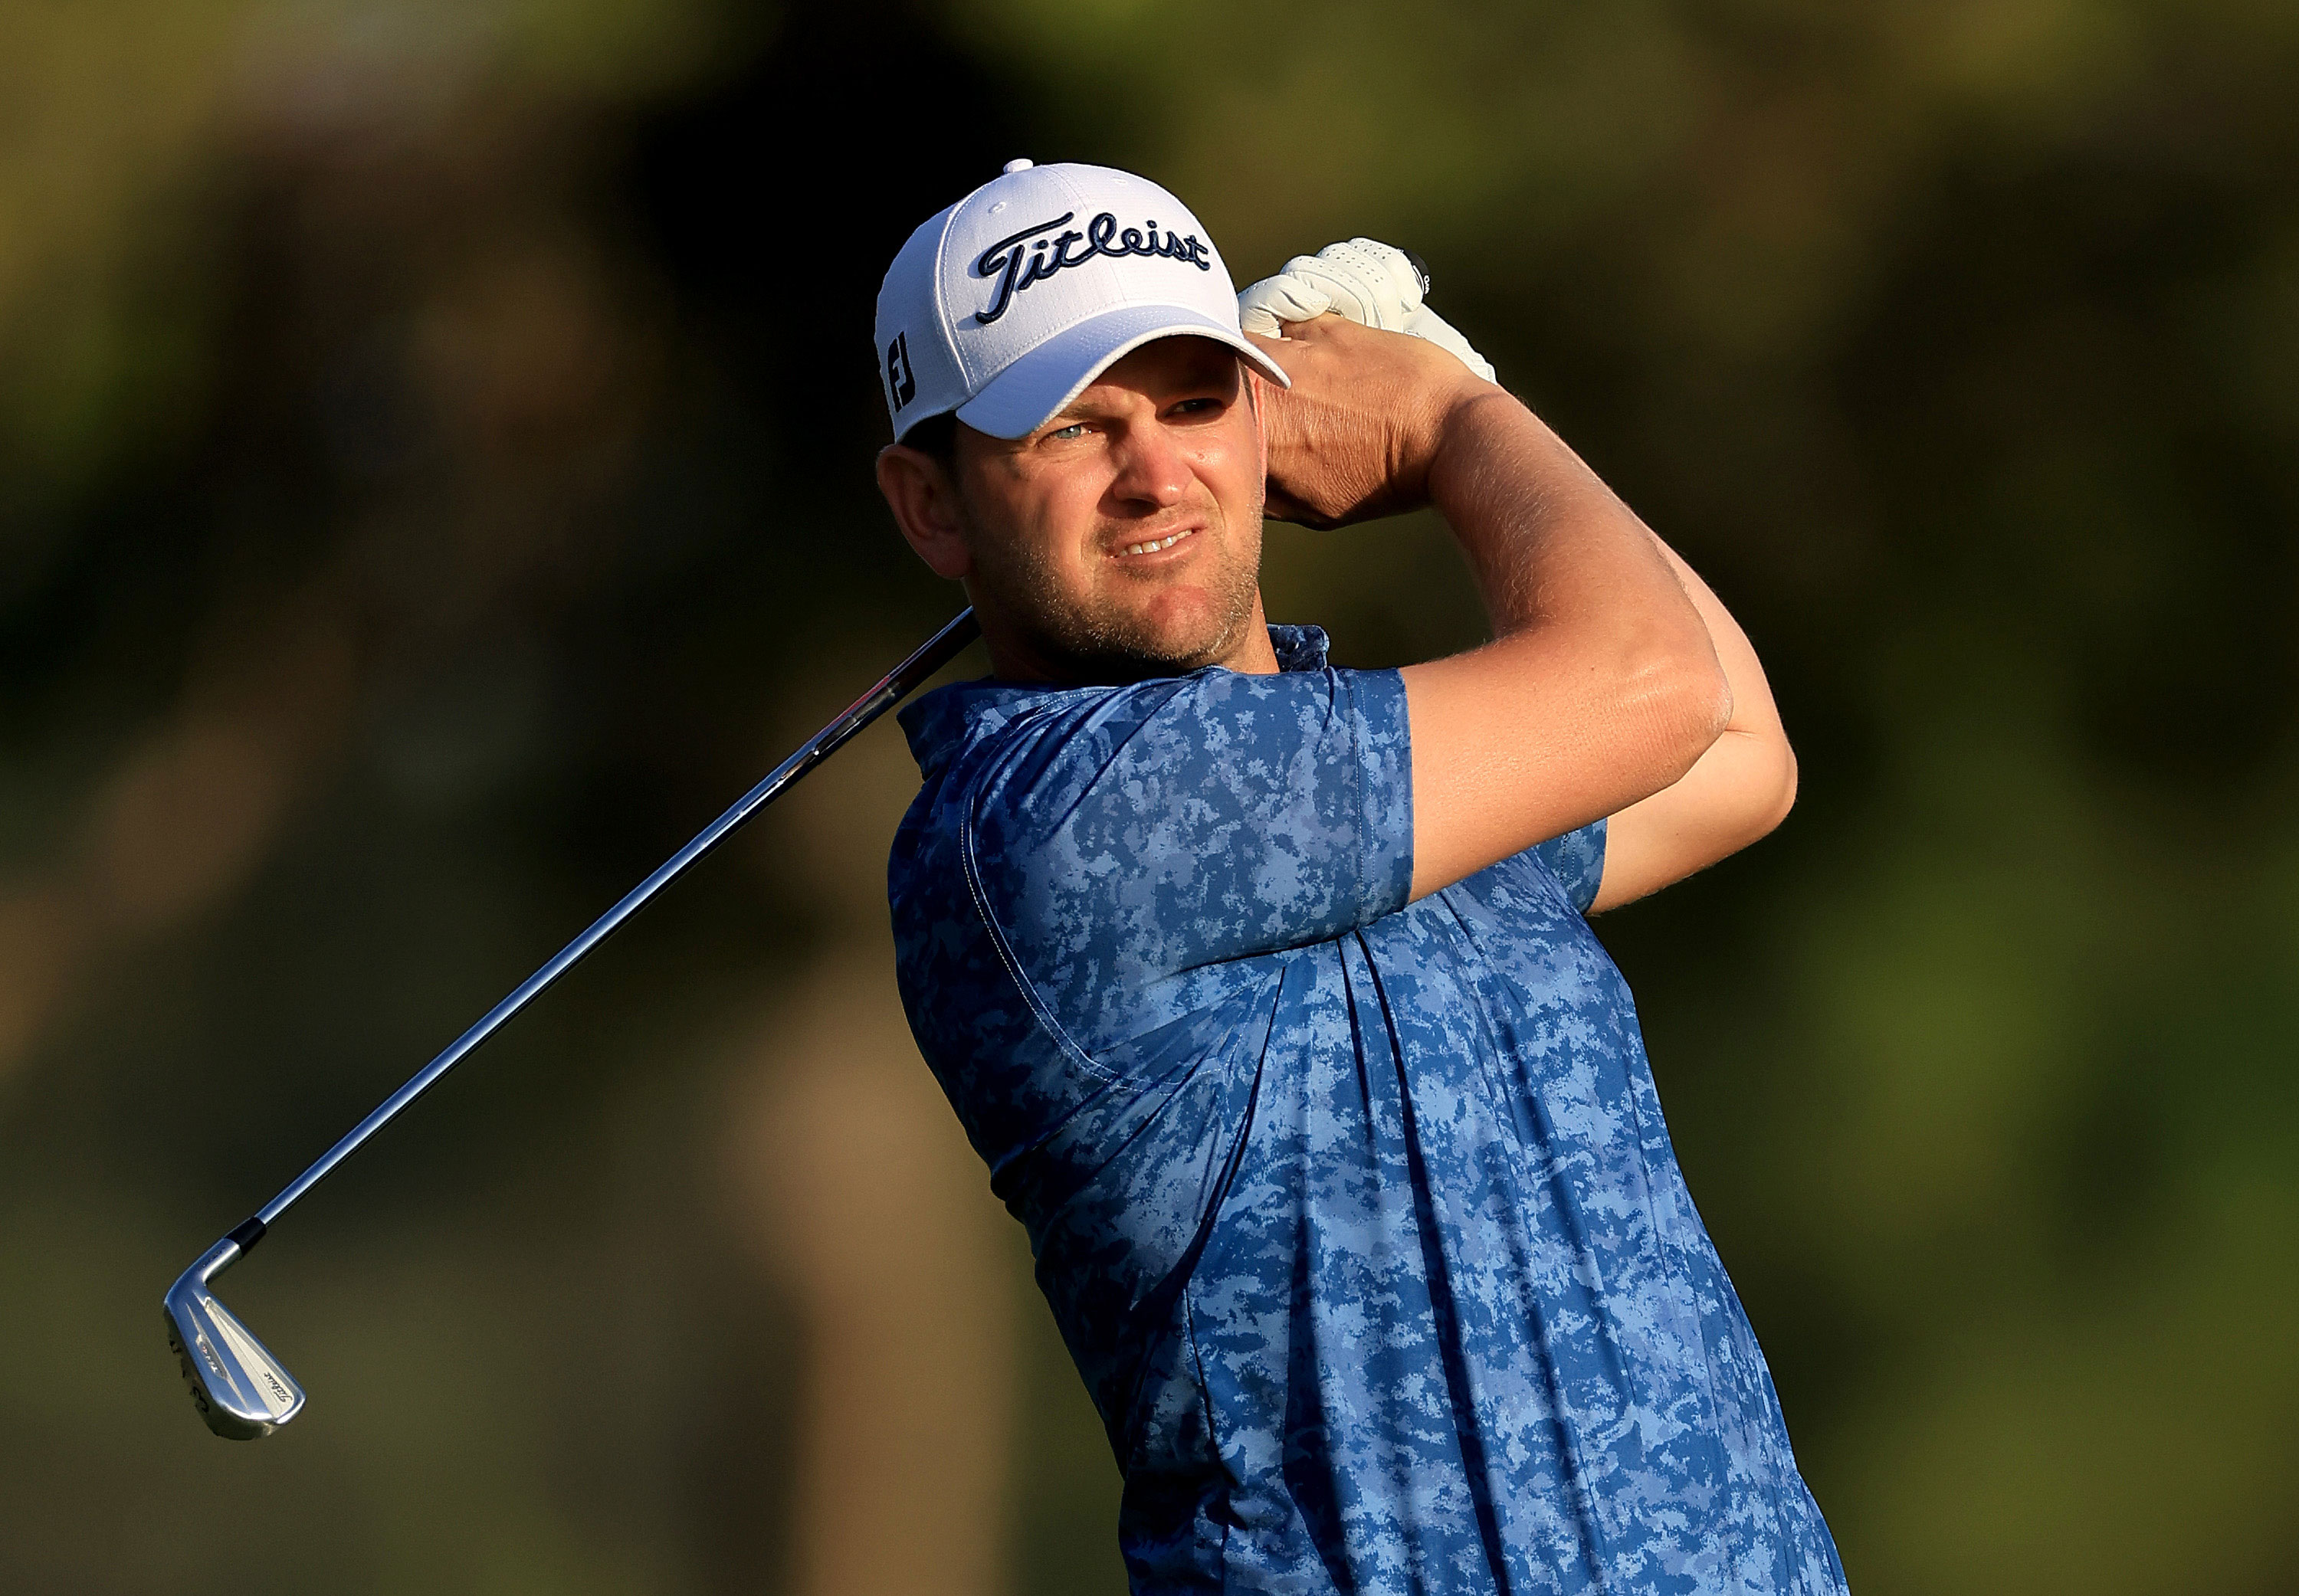 Former Ryder Cupper who jumped to LIV Golf gets approval to return to DP World Tour Golf News and Tour Information GolfDigest